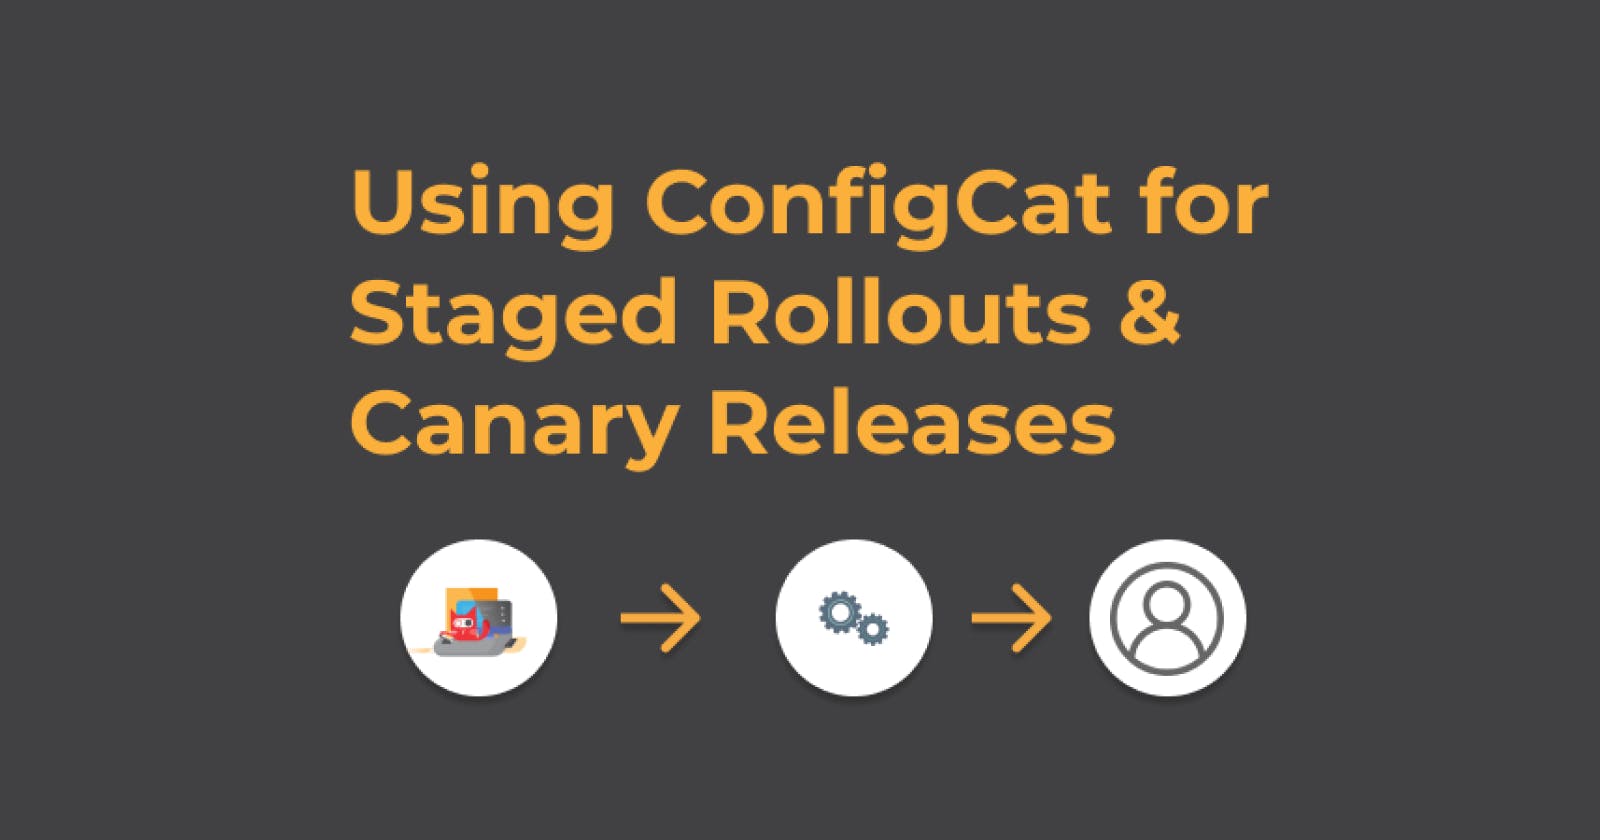 Using ConfigCat for Staged Rollouts and Canary Releases